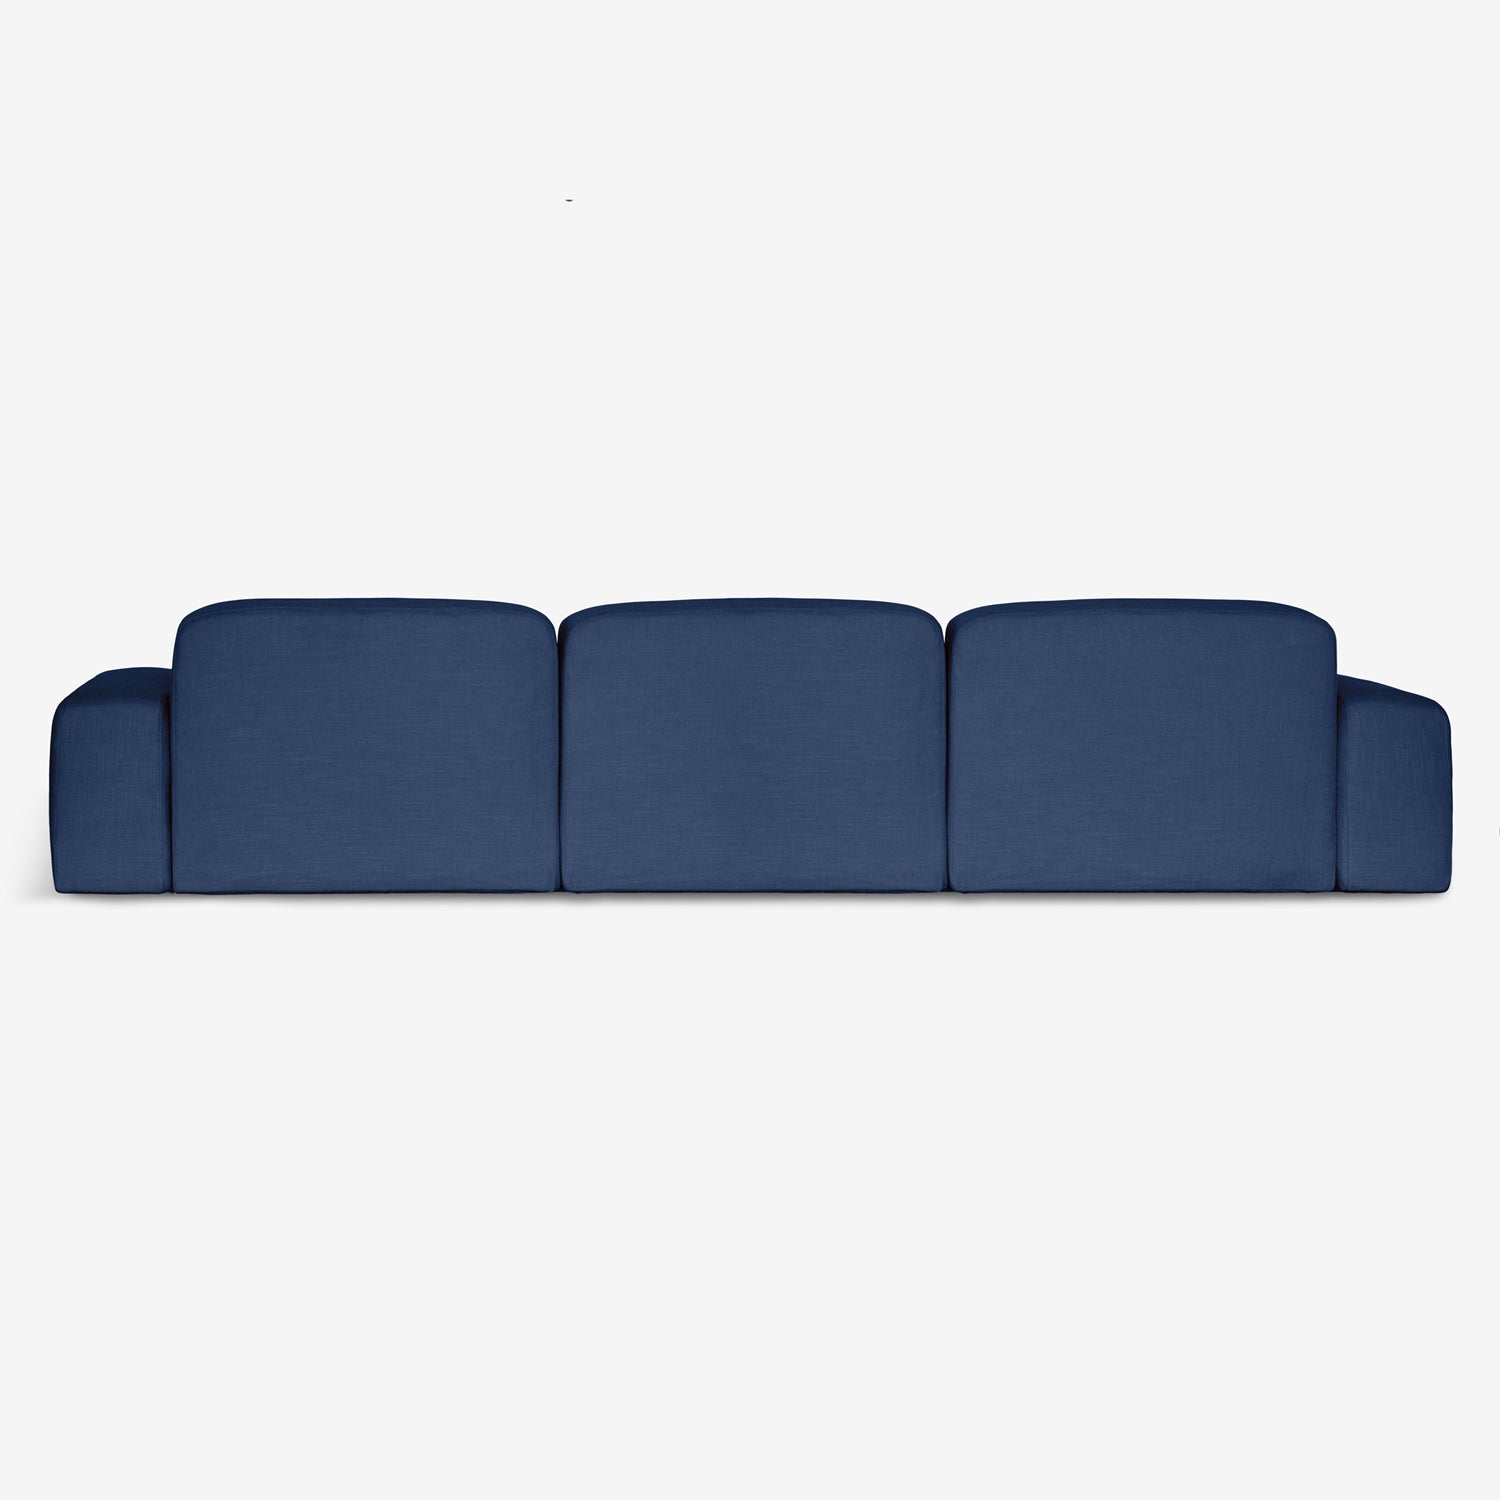 Eco-Friendly Seating Delight: Libero sofa in navy blue back view